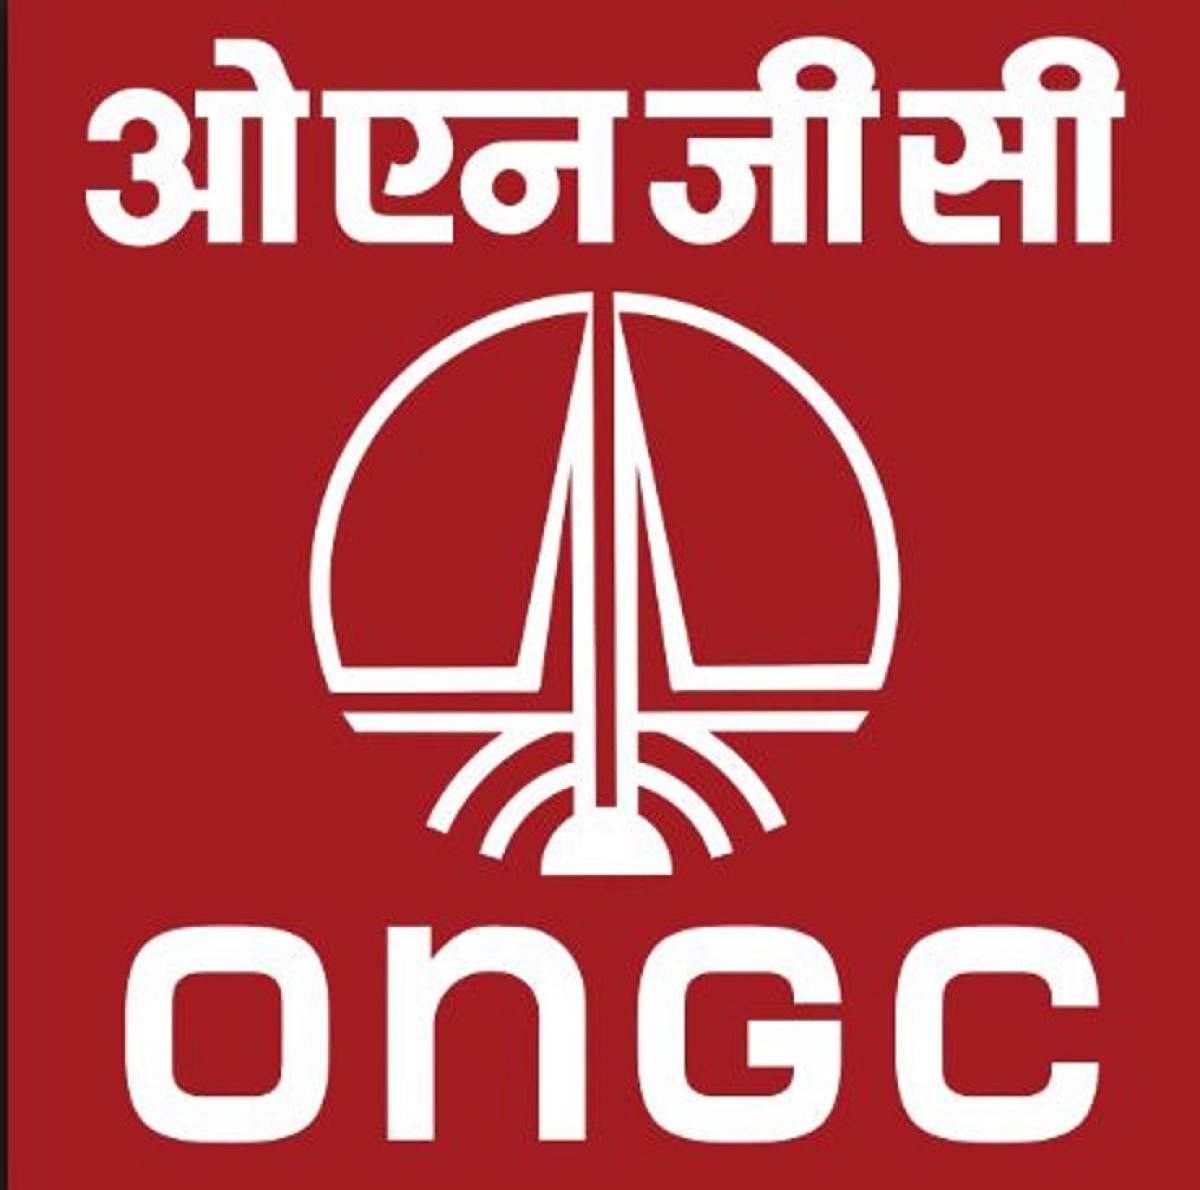 The rating agency downgraded ONGC's local and foreign currency issuer ratings to Baa2 from Baa1. It also downgraded the ratings of the unsecured bonds issued by ONGC and those issued by its subsidiary ONGC Videsh Ltd.